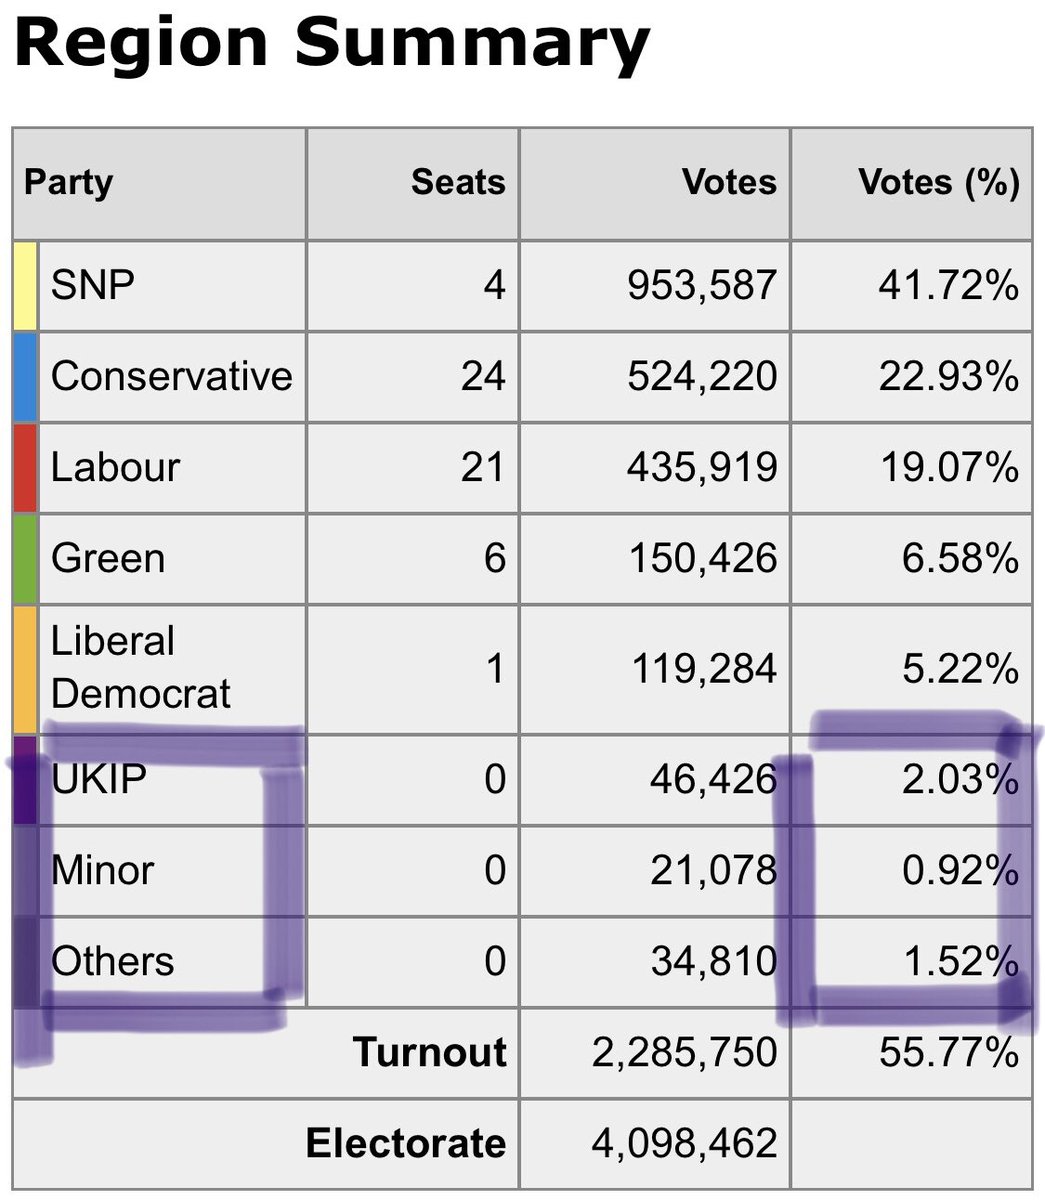 Even if RISE and Solidarity weren’t separate parties, even if *all* the minor (non Green) parties votes were combined as a single pro-indy party, on a total of about 4.5% of the vote, it is pretty certain they would have failed to gain one single MSP. 7/